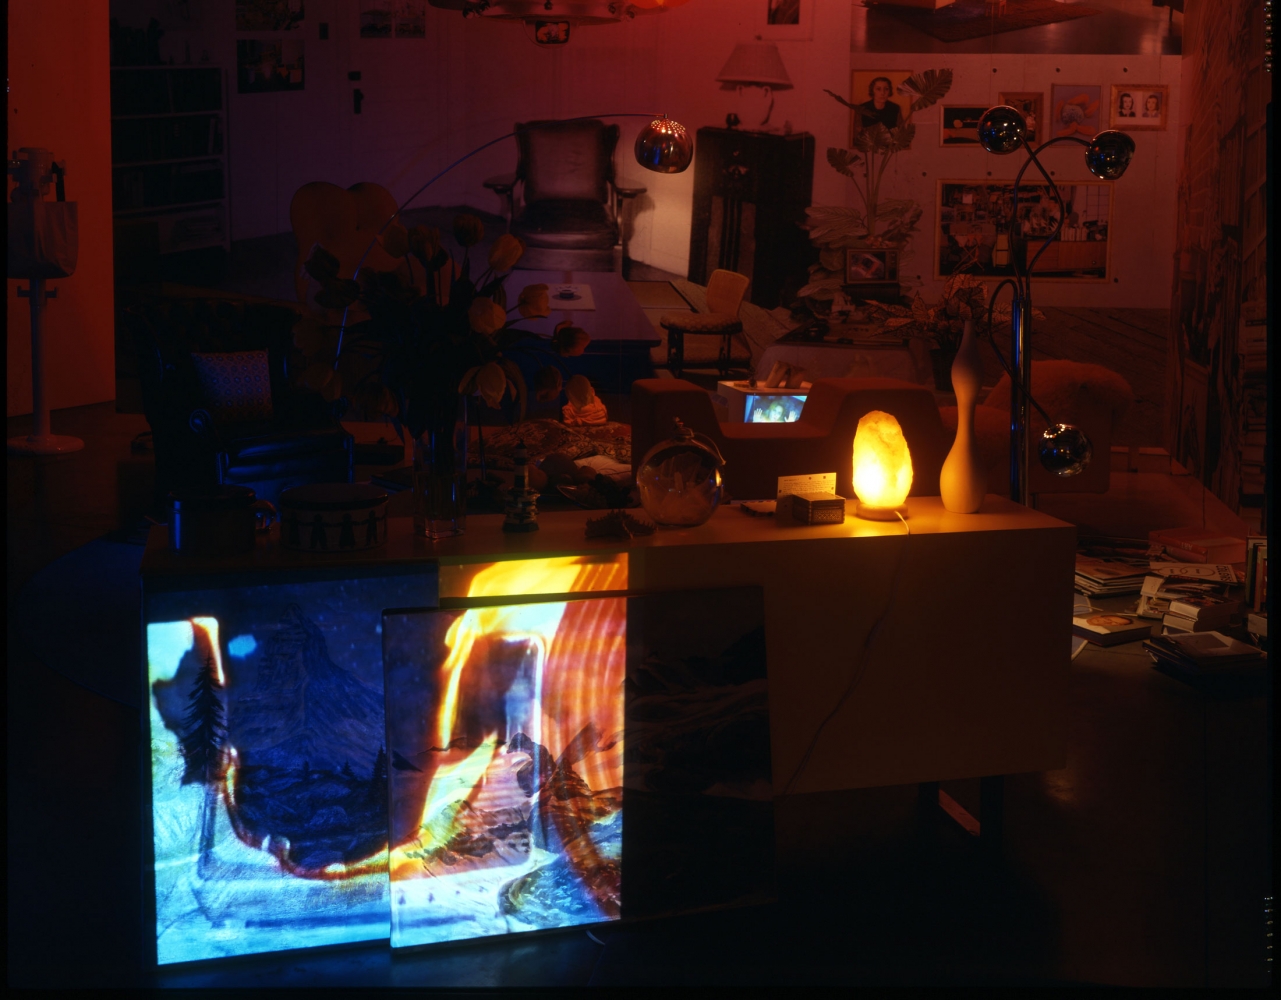 Pipilotti Rist
Himalaya&amp;#39;s Sister&amp;#39;s Living Room, New York, 2000
7 projectors, 7 players in and around furniture and various objects, mounted wallpaper on wood, audio system
Dimensions variable
Installation view
April 8 &amp;ndash; May 27, 2000
Luhring Augustine, New York